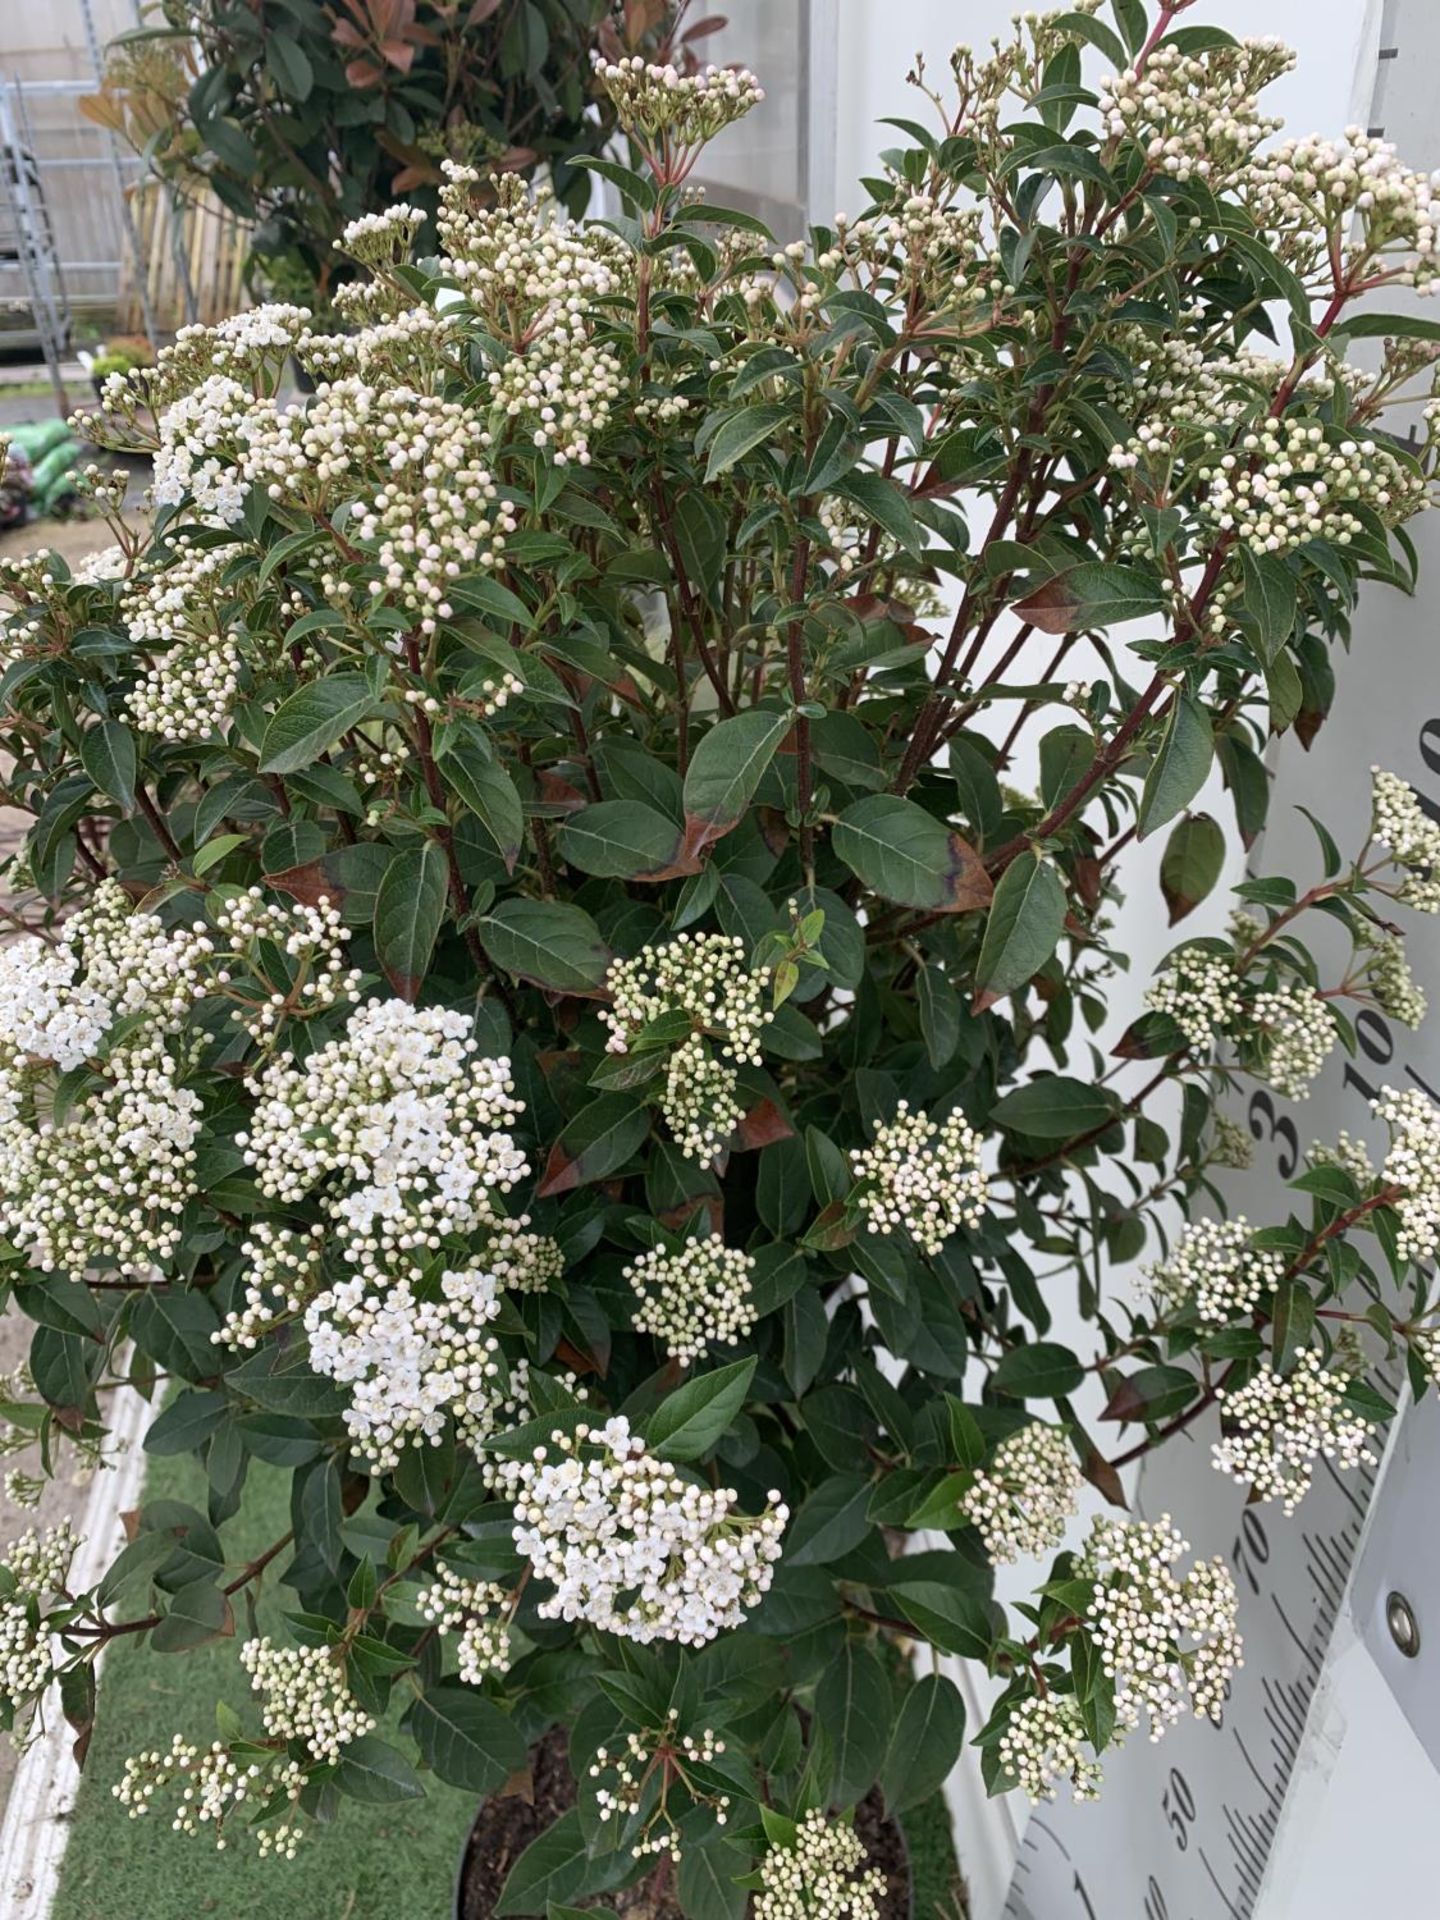 ONE VIBURNUM TINUS STANDARD TREE 'EVE PRICE' APPROX 140CM IN HEIGHT IN A 10 LTR POT PLUS VAT - Image 3 of 7